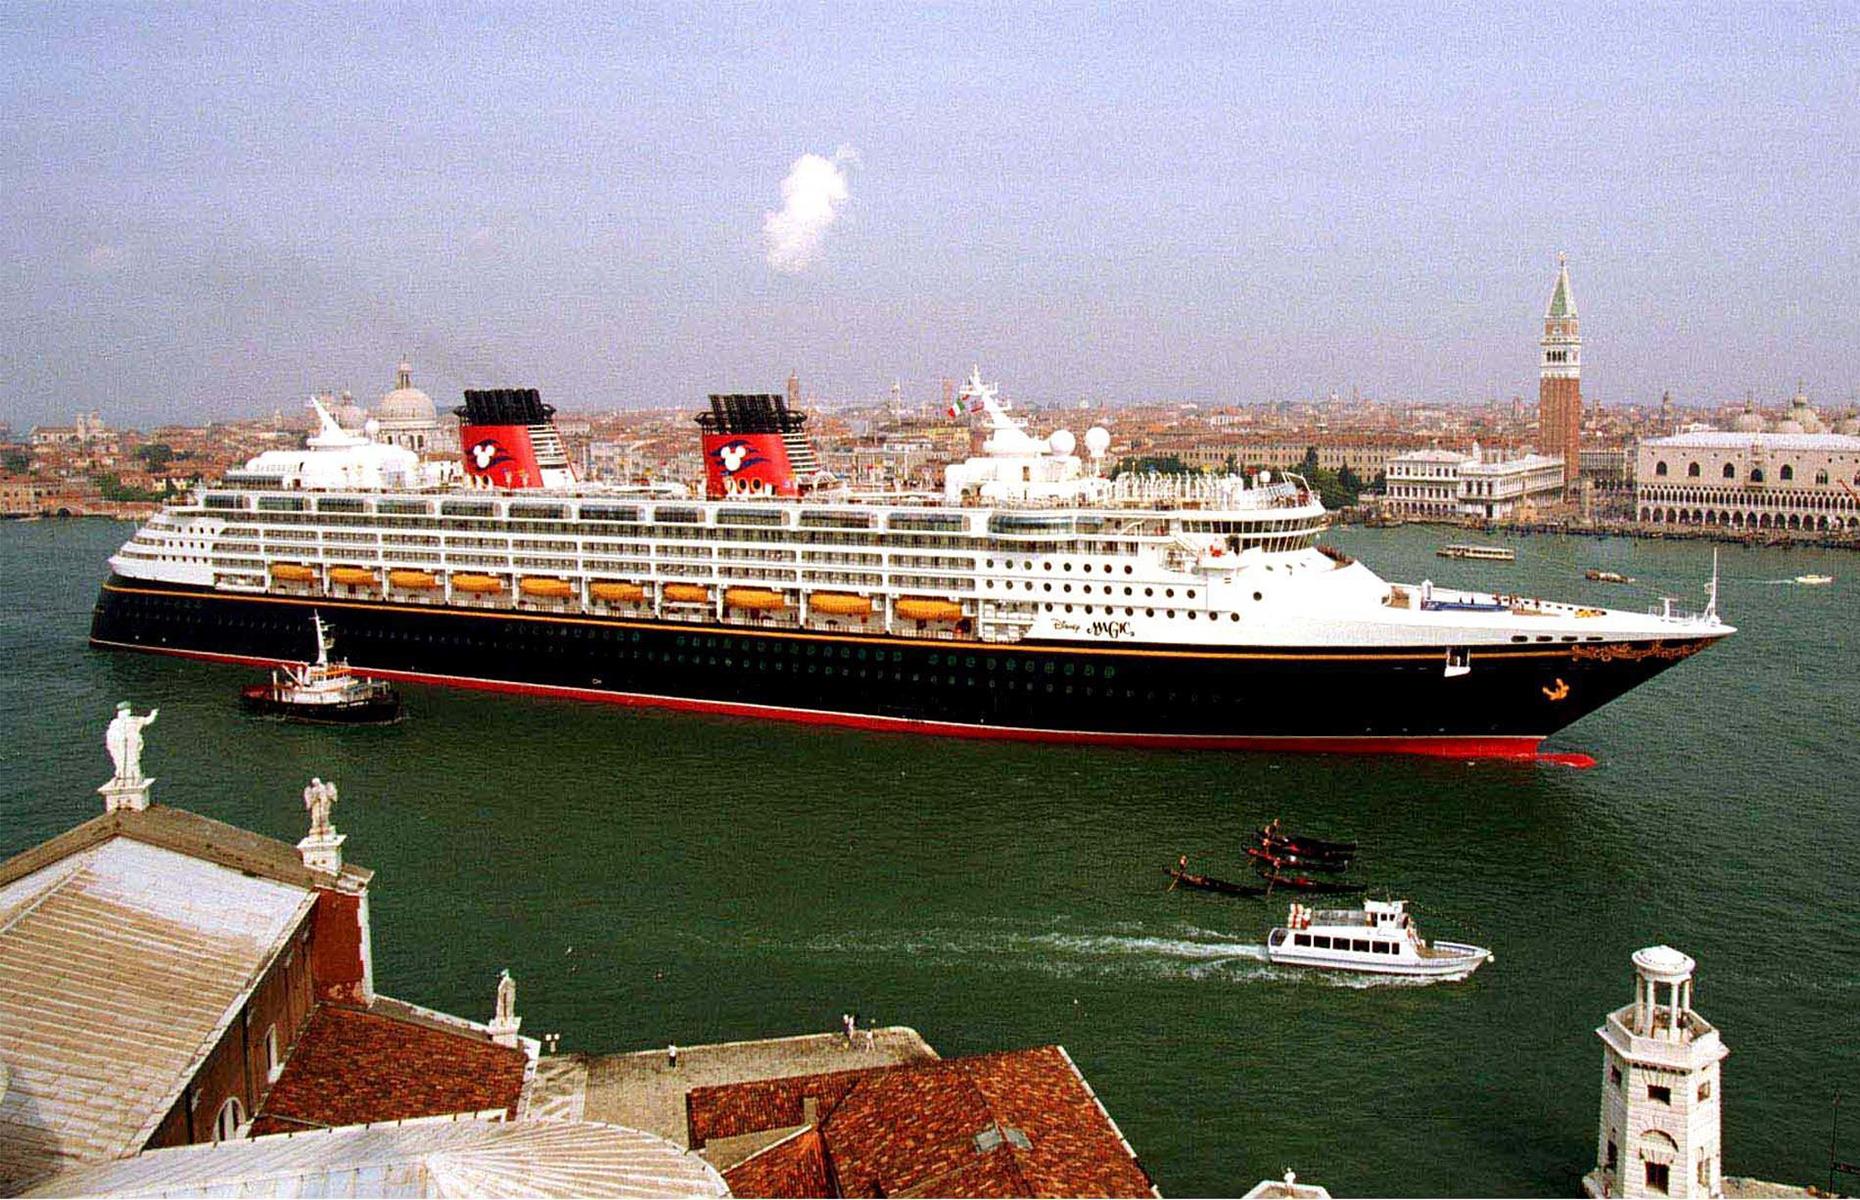 Slide 38 of 38: By the 1990s, it wasn't all about Disney's parks either. Disney Magic, the first cruise ship in the Disney Cruise Line's portfolio, was commissioned in the mid-90s. Having been built in Italy, the ship is pictured here cruising through Venice in early July 1998 – its destination was Florida's Port Canaveral, where it would set out on its maiden voyage on 30 July 1998. Planning a trip to a Disney park soon? While Disneyland California remains closed and Disney Cruise Line voyages are paused, Walt Disney World Resort, Tokyo Disneyland and Disneyland Paris are open to guests. Here's what you need to know.